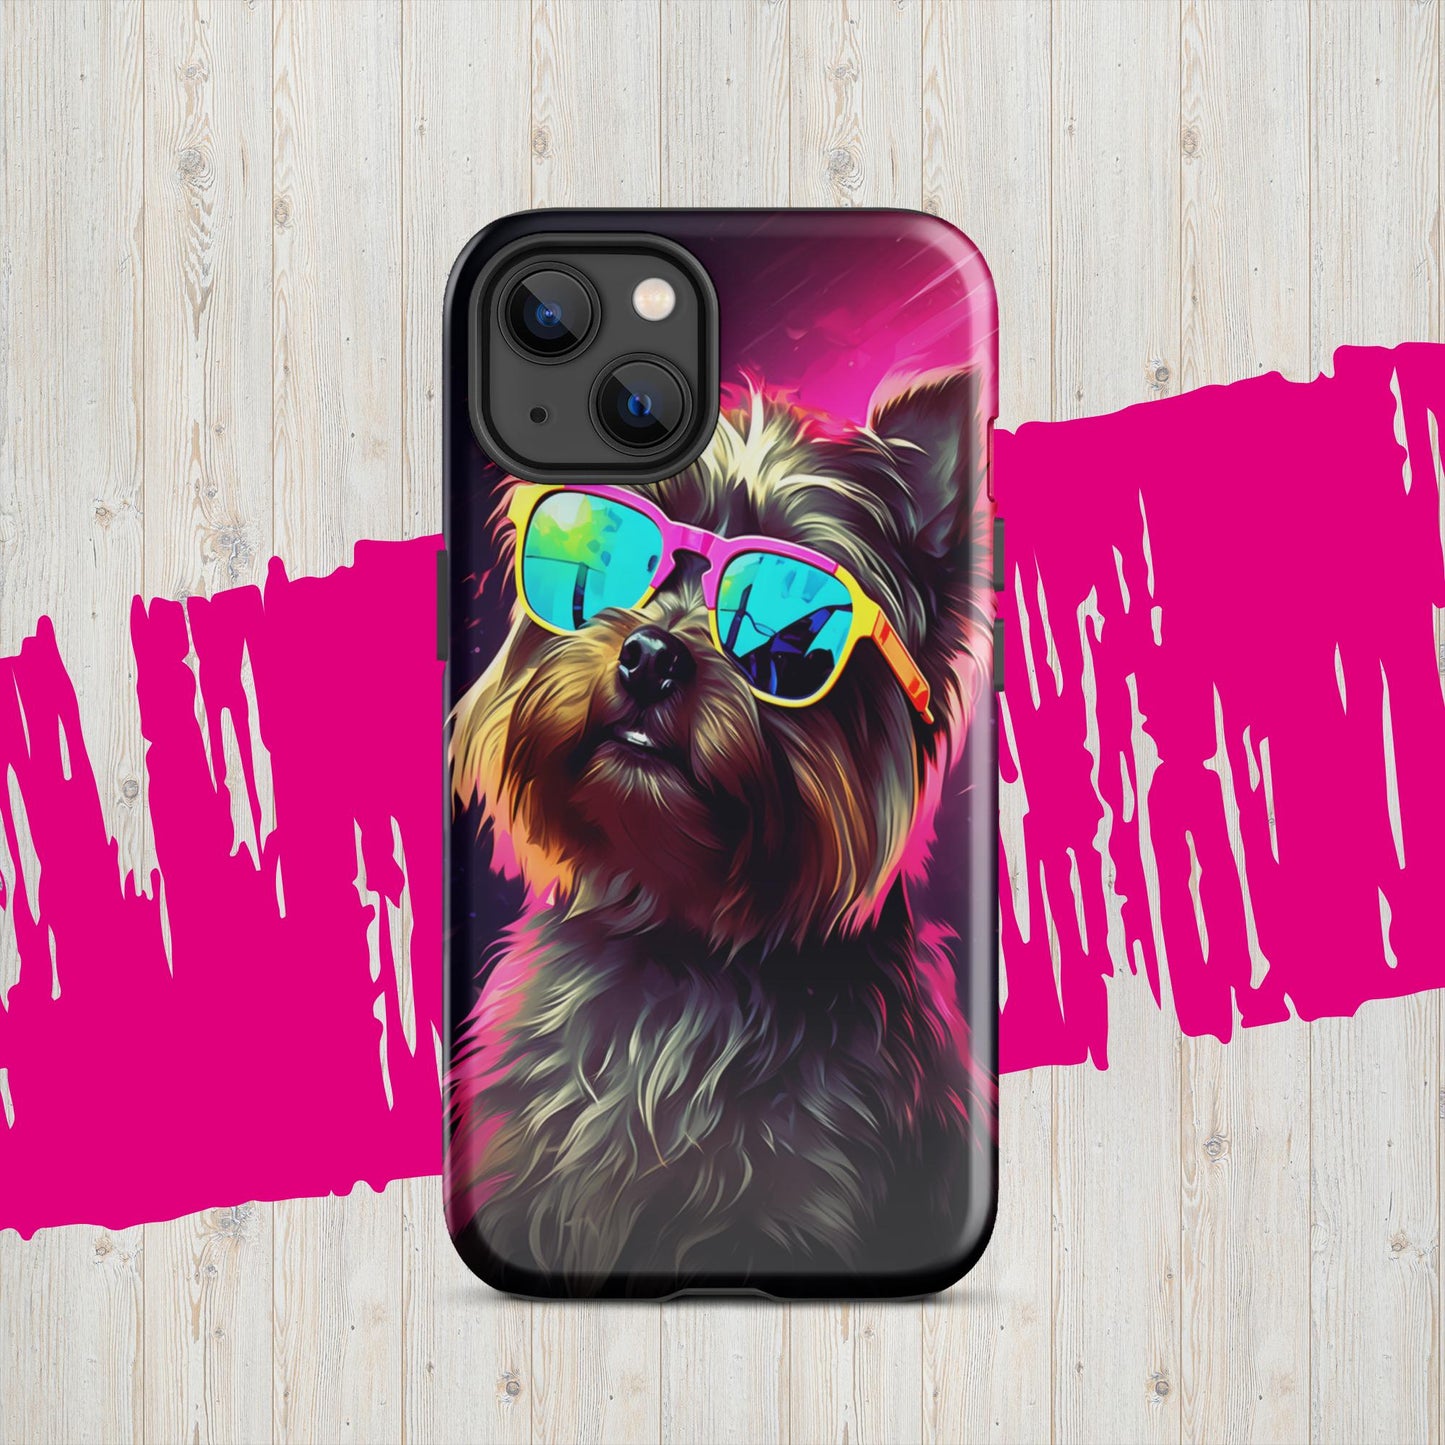 Tough Case for iPhone Tough Case, Shockproof Phone Case,Cool Designed Phone Cases, Pocket-friendly